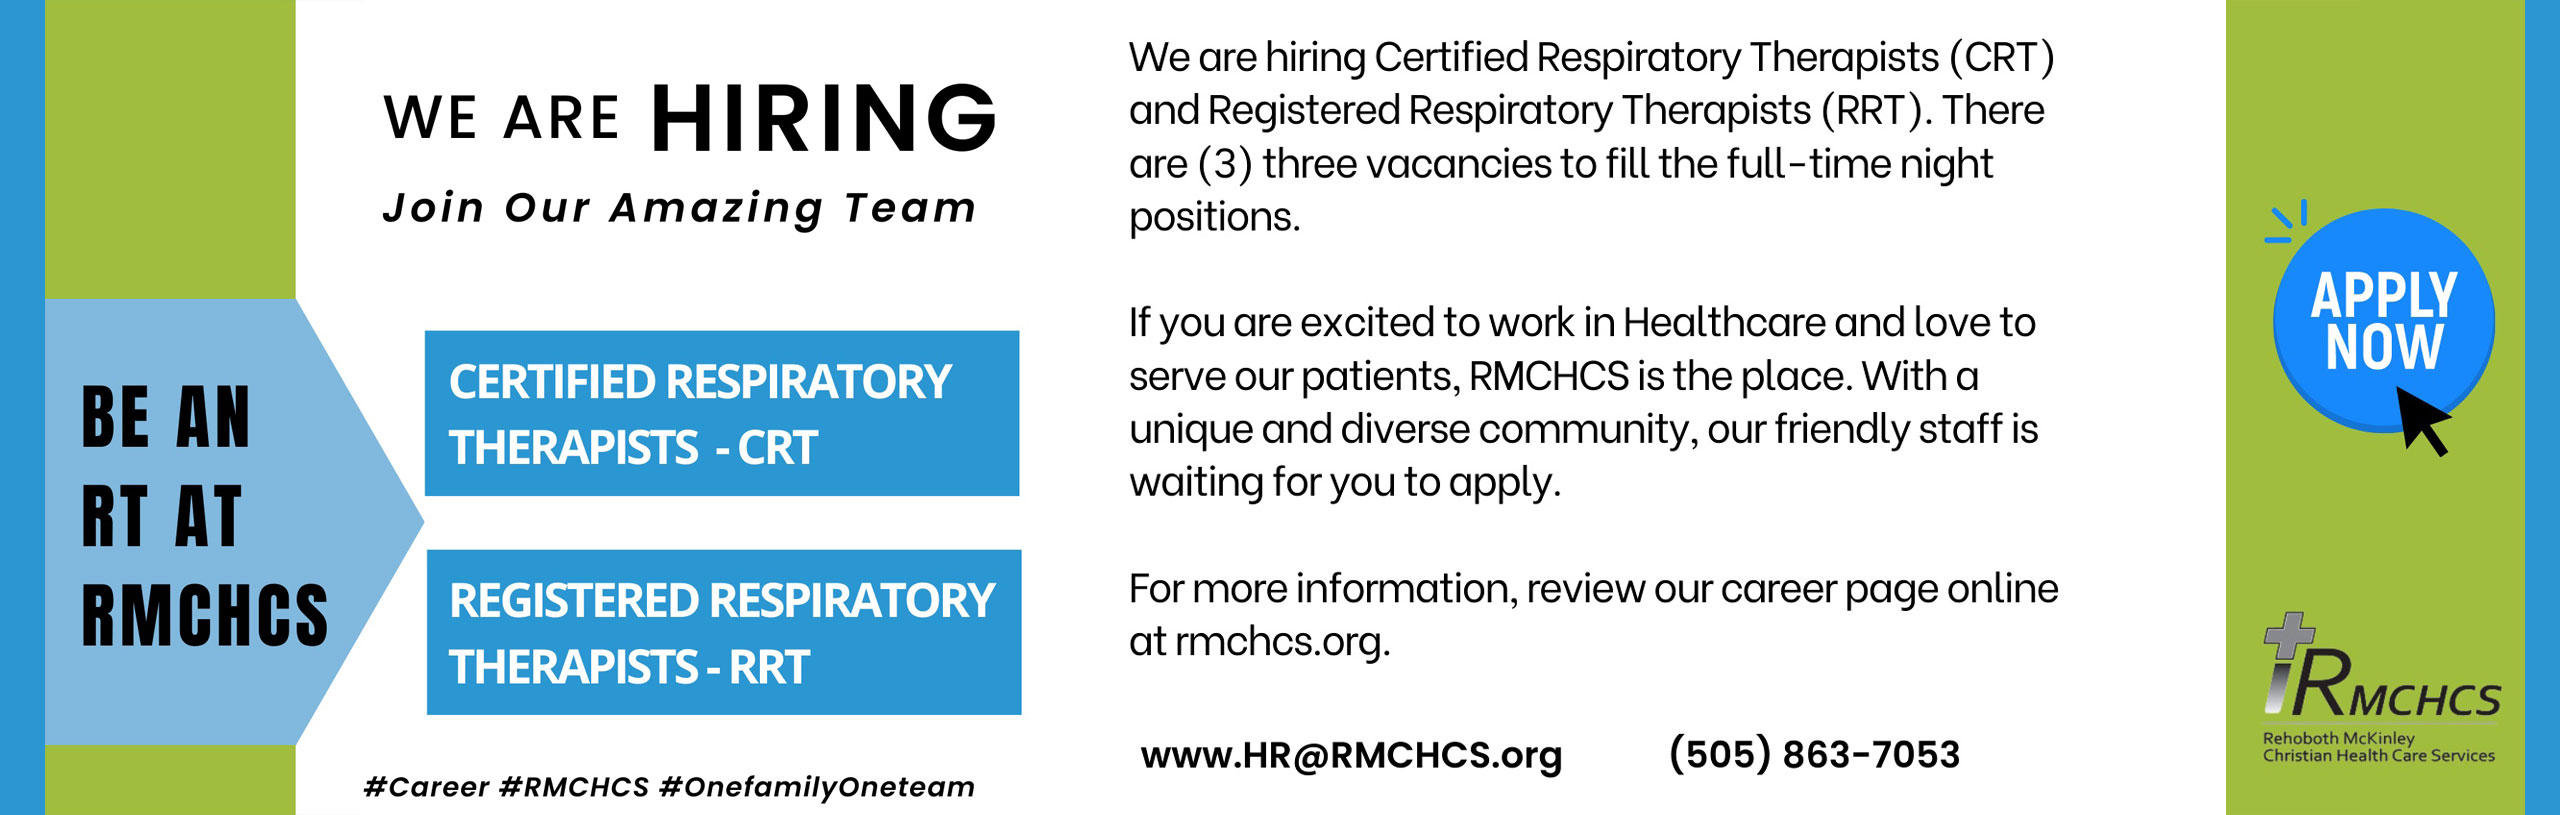 Banner that says:
WE ARE HIRING
Join Our Amazing Team
*BE AN RT AT RMCHCS

We are hiring Certified Respiratory Therapists (CRT)and Registered Respiratory Therapists (RRT) . There are (3) three vacancies to fill the full-time night positions.

If you are excited to work in Healthcare and love to serve our patients, RMCHCS is the place. With a unique and diverse community , Our friendly staff is waiting for you to apply.

For more information, review our career page online at rmchcs.org.
www.HR@RMCHCS.org 
(505) 863-7053